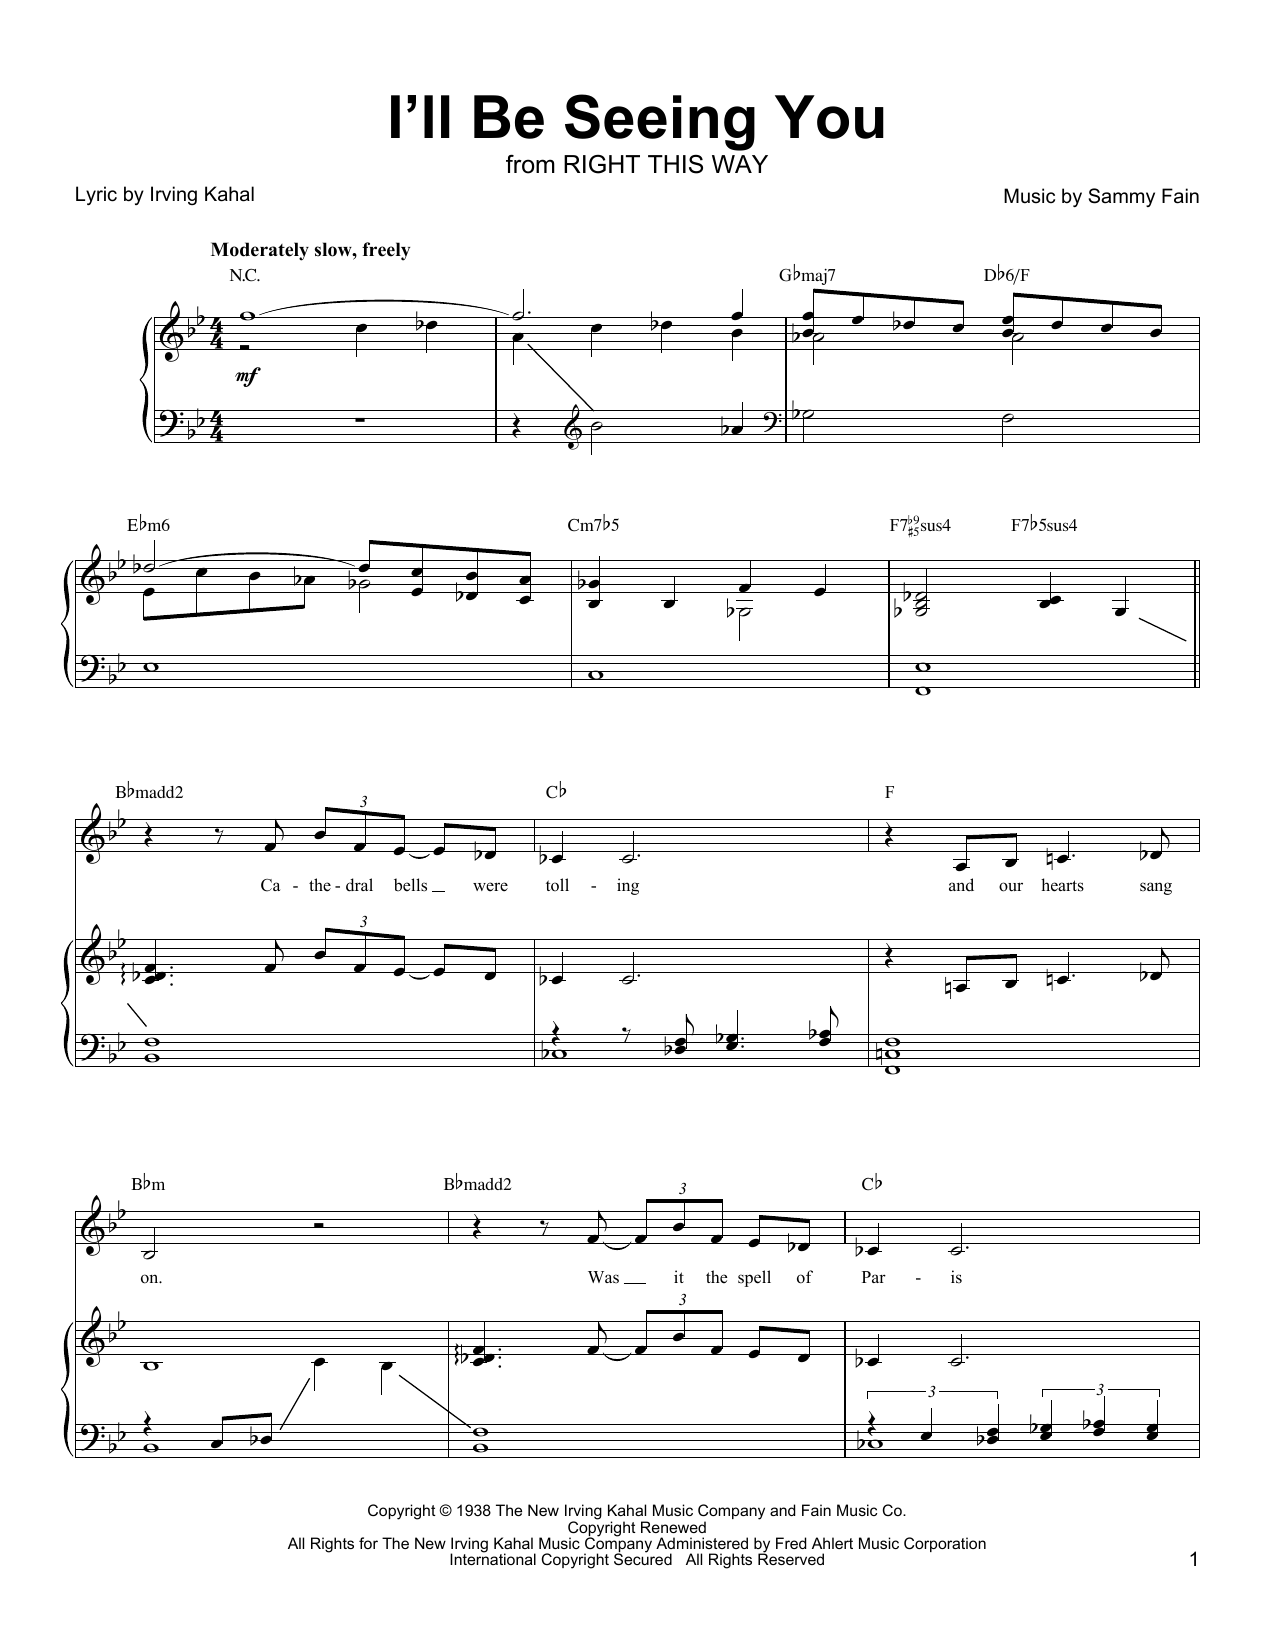 Linda Eder I'll Be Seeing You sheet music notes and chords. Download Printable PDF.